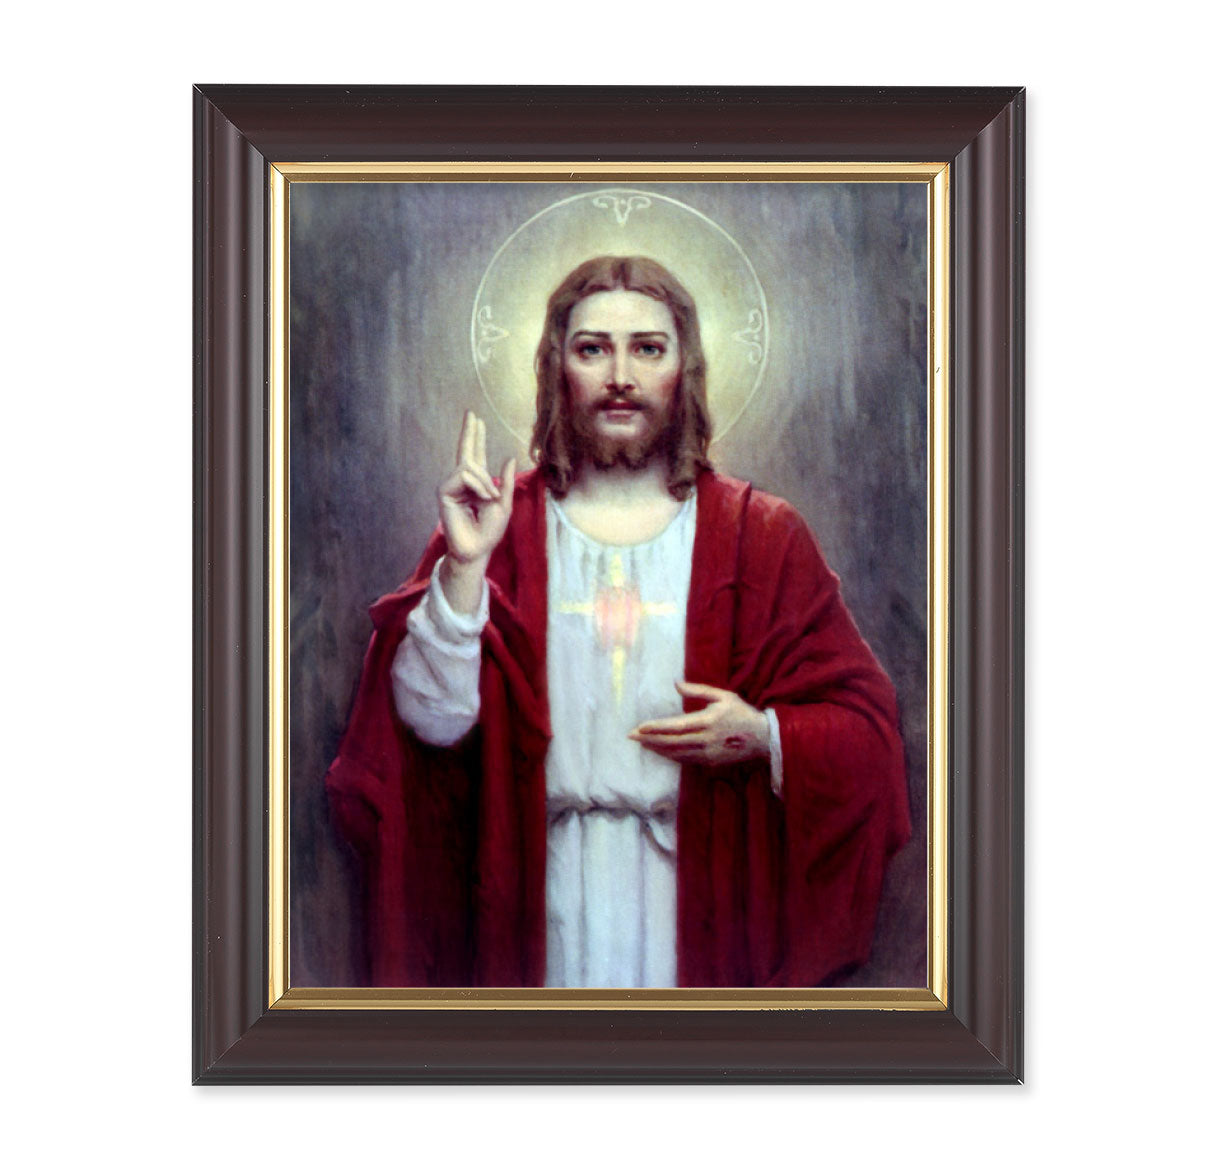 Sacred Heart of Jesus Picture Framed Wall Art Decor, Medium, Classic Fluted Dark Walnut Finished Frame with Gold-Leaf Lip